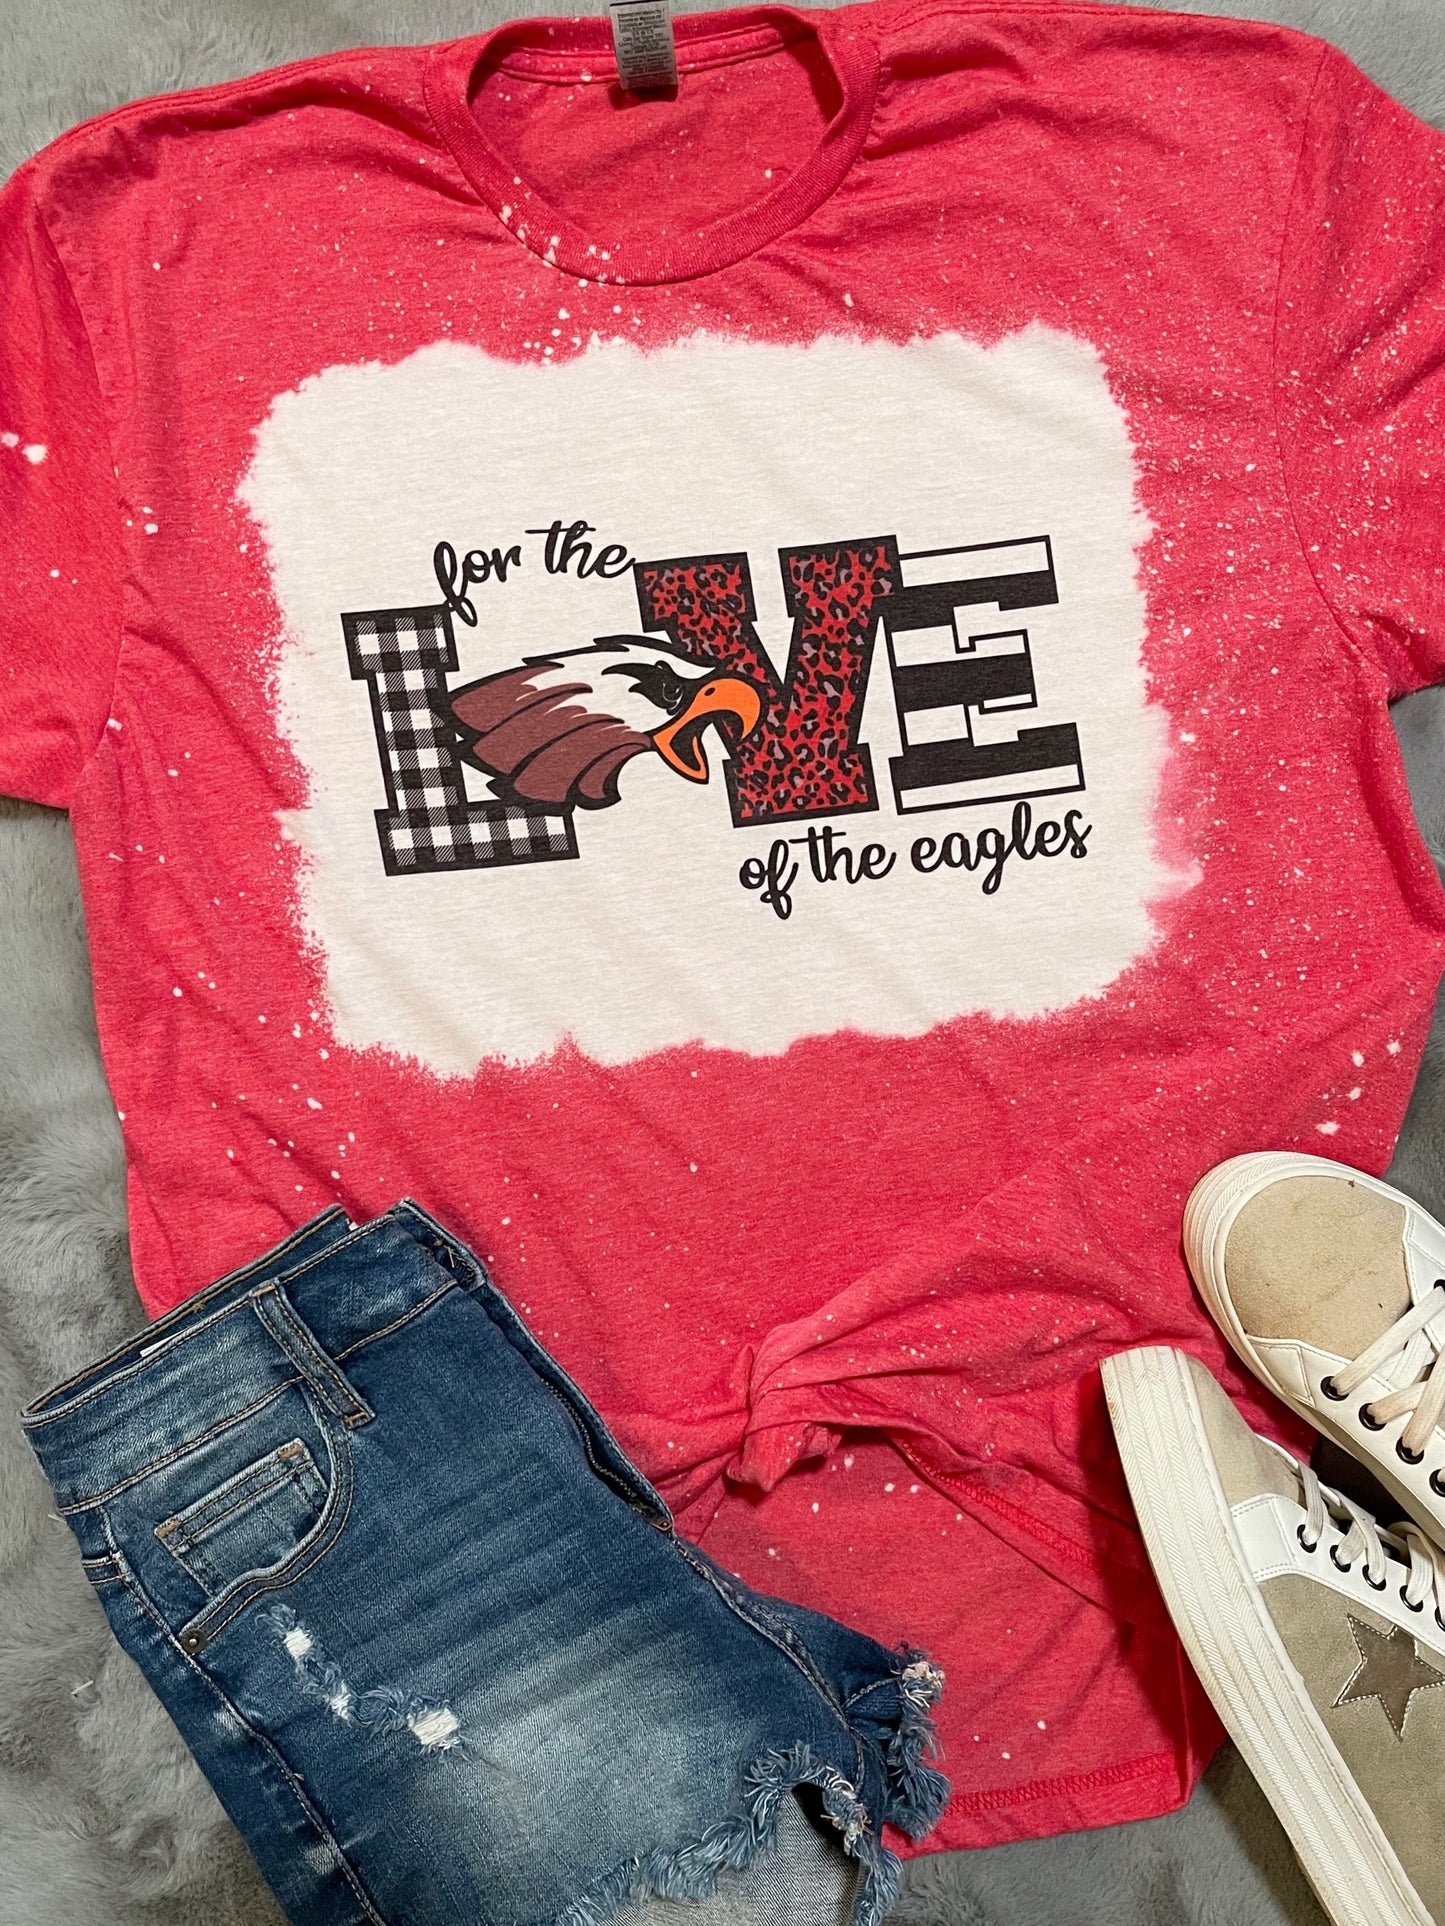 For The Love of the Eagles Tee